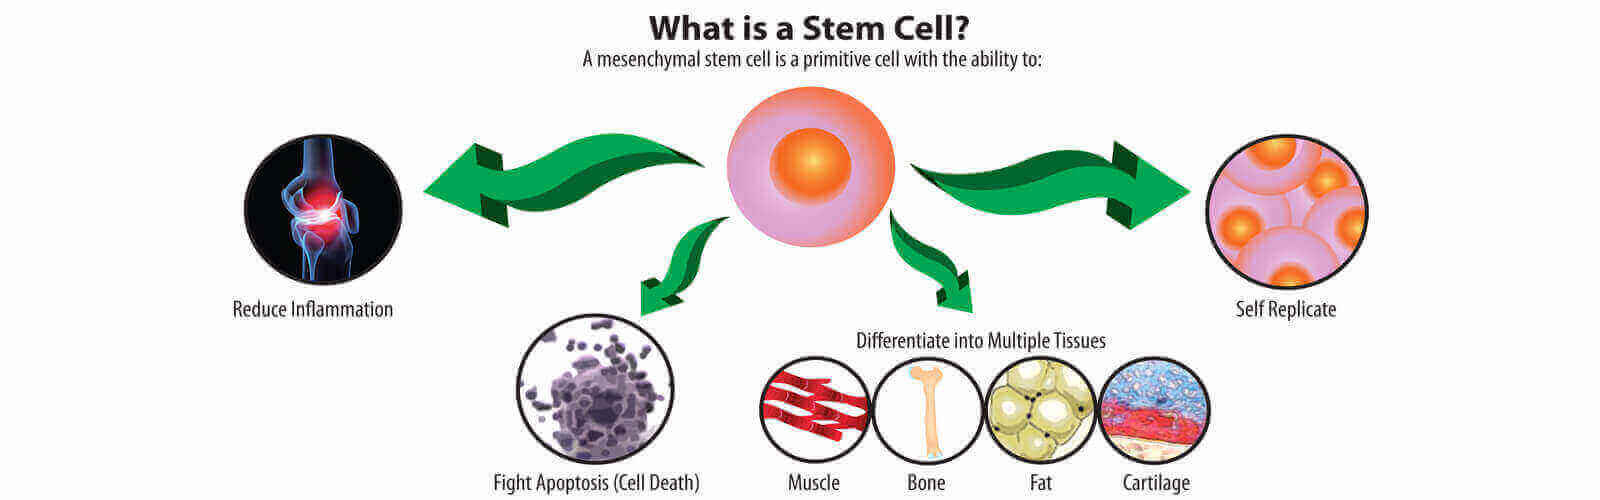 Stem Cell Treatment in Bosnia And Herzegovina